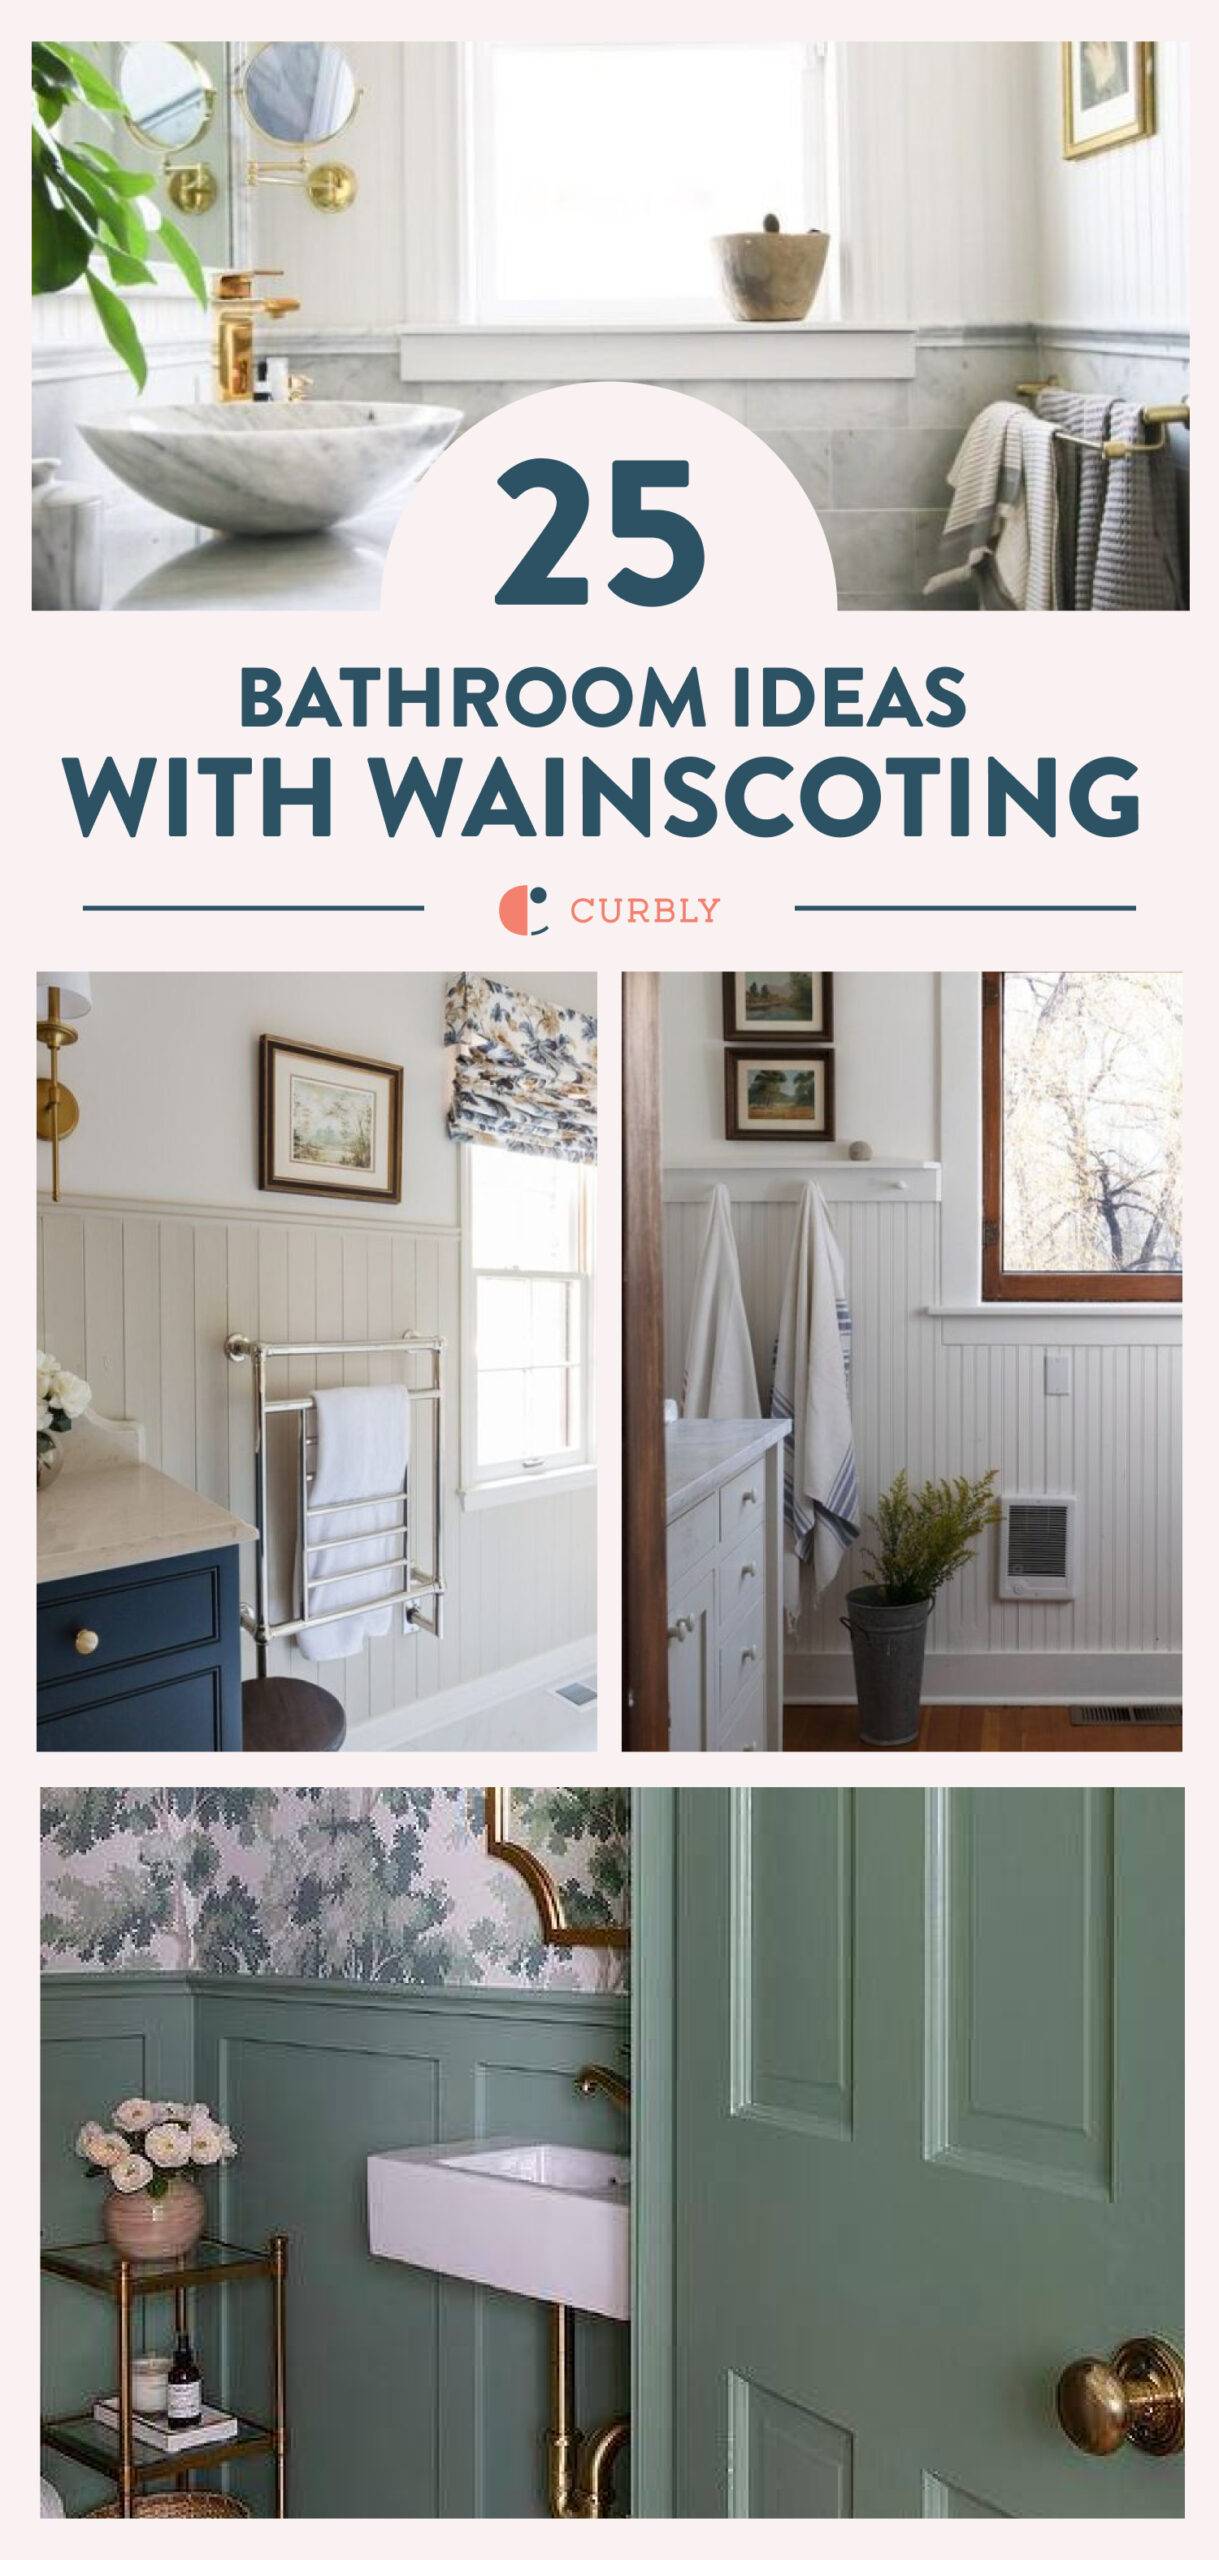 From Chic to Cozy: 25 Bathroom Wainscoting Ideas - Curbly